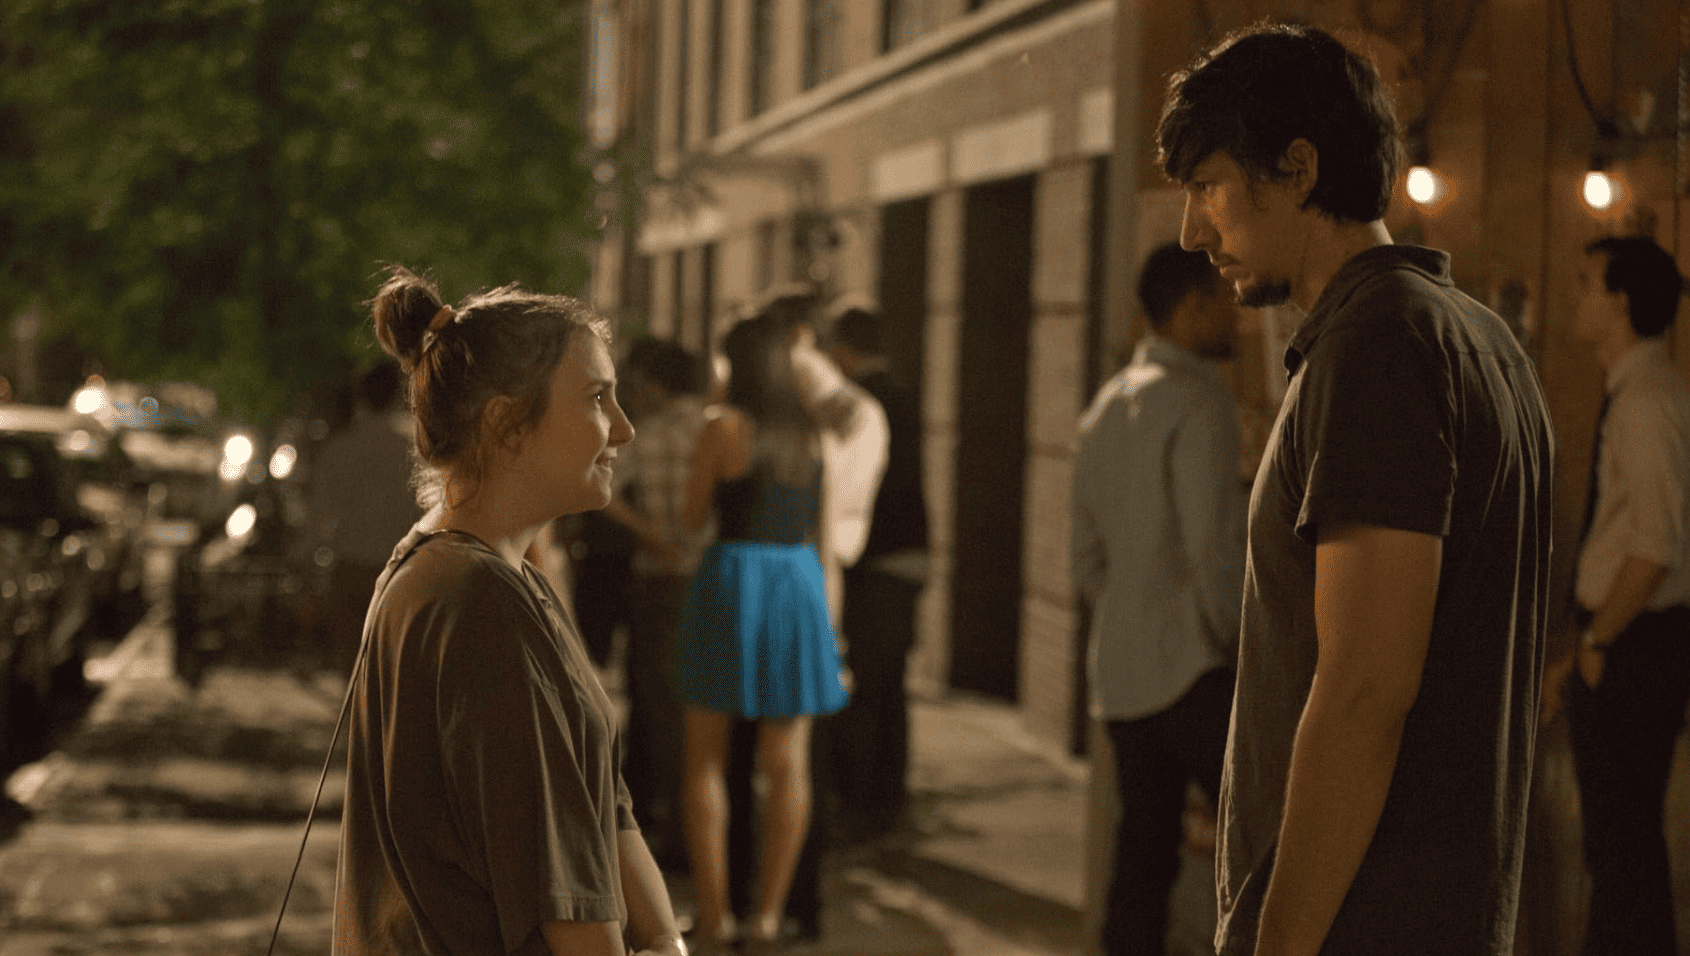 Adam Driver and Lena Dunham standing in the middle of a sidewalk staring at each other while having an intense conversation in this image from Apatow Productions